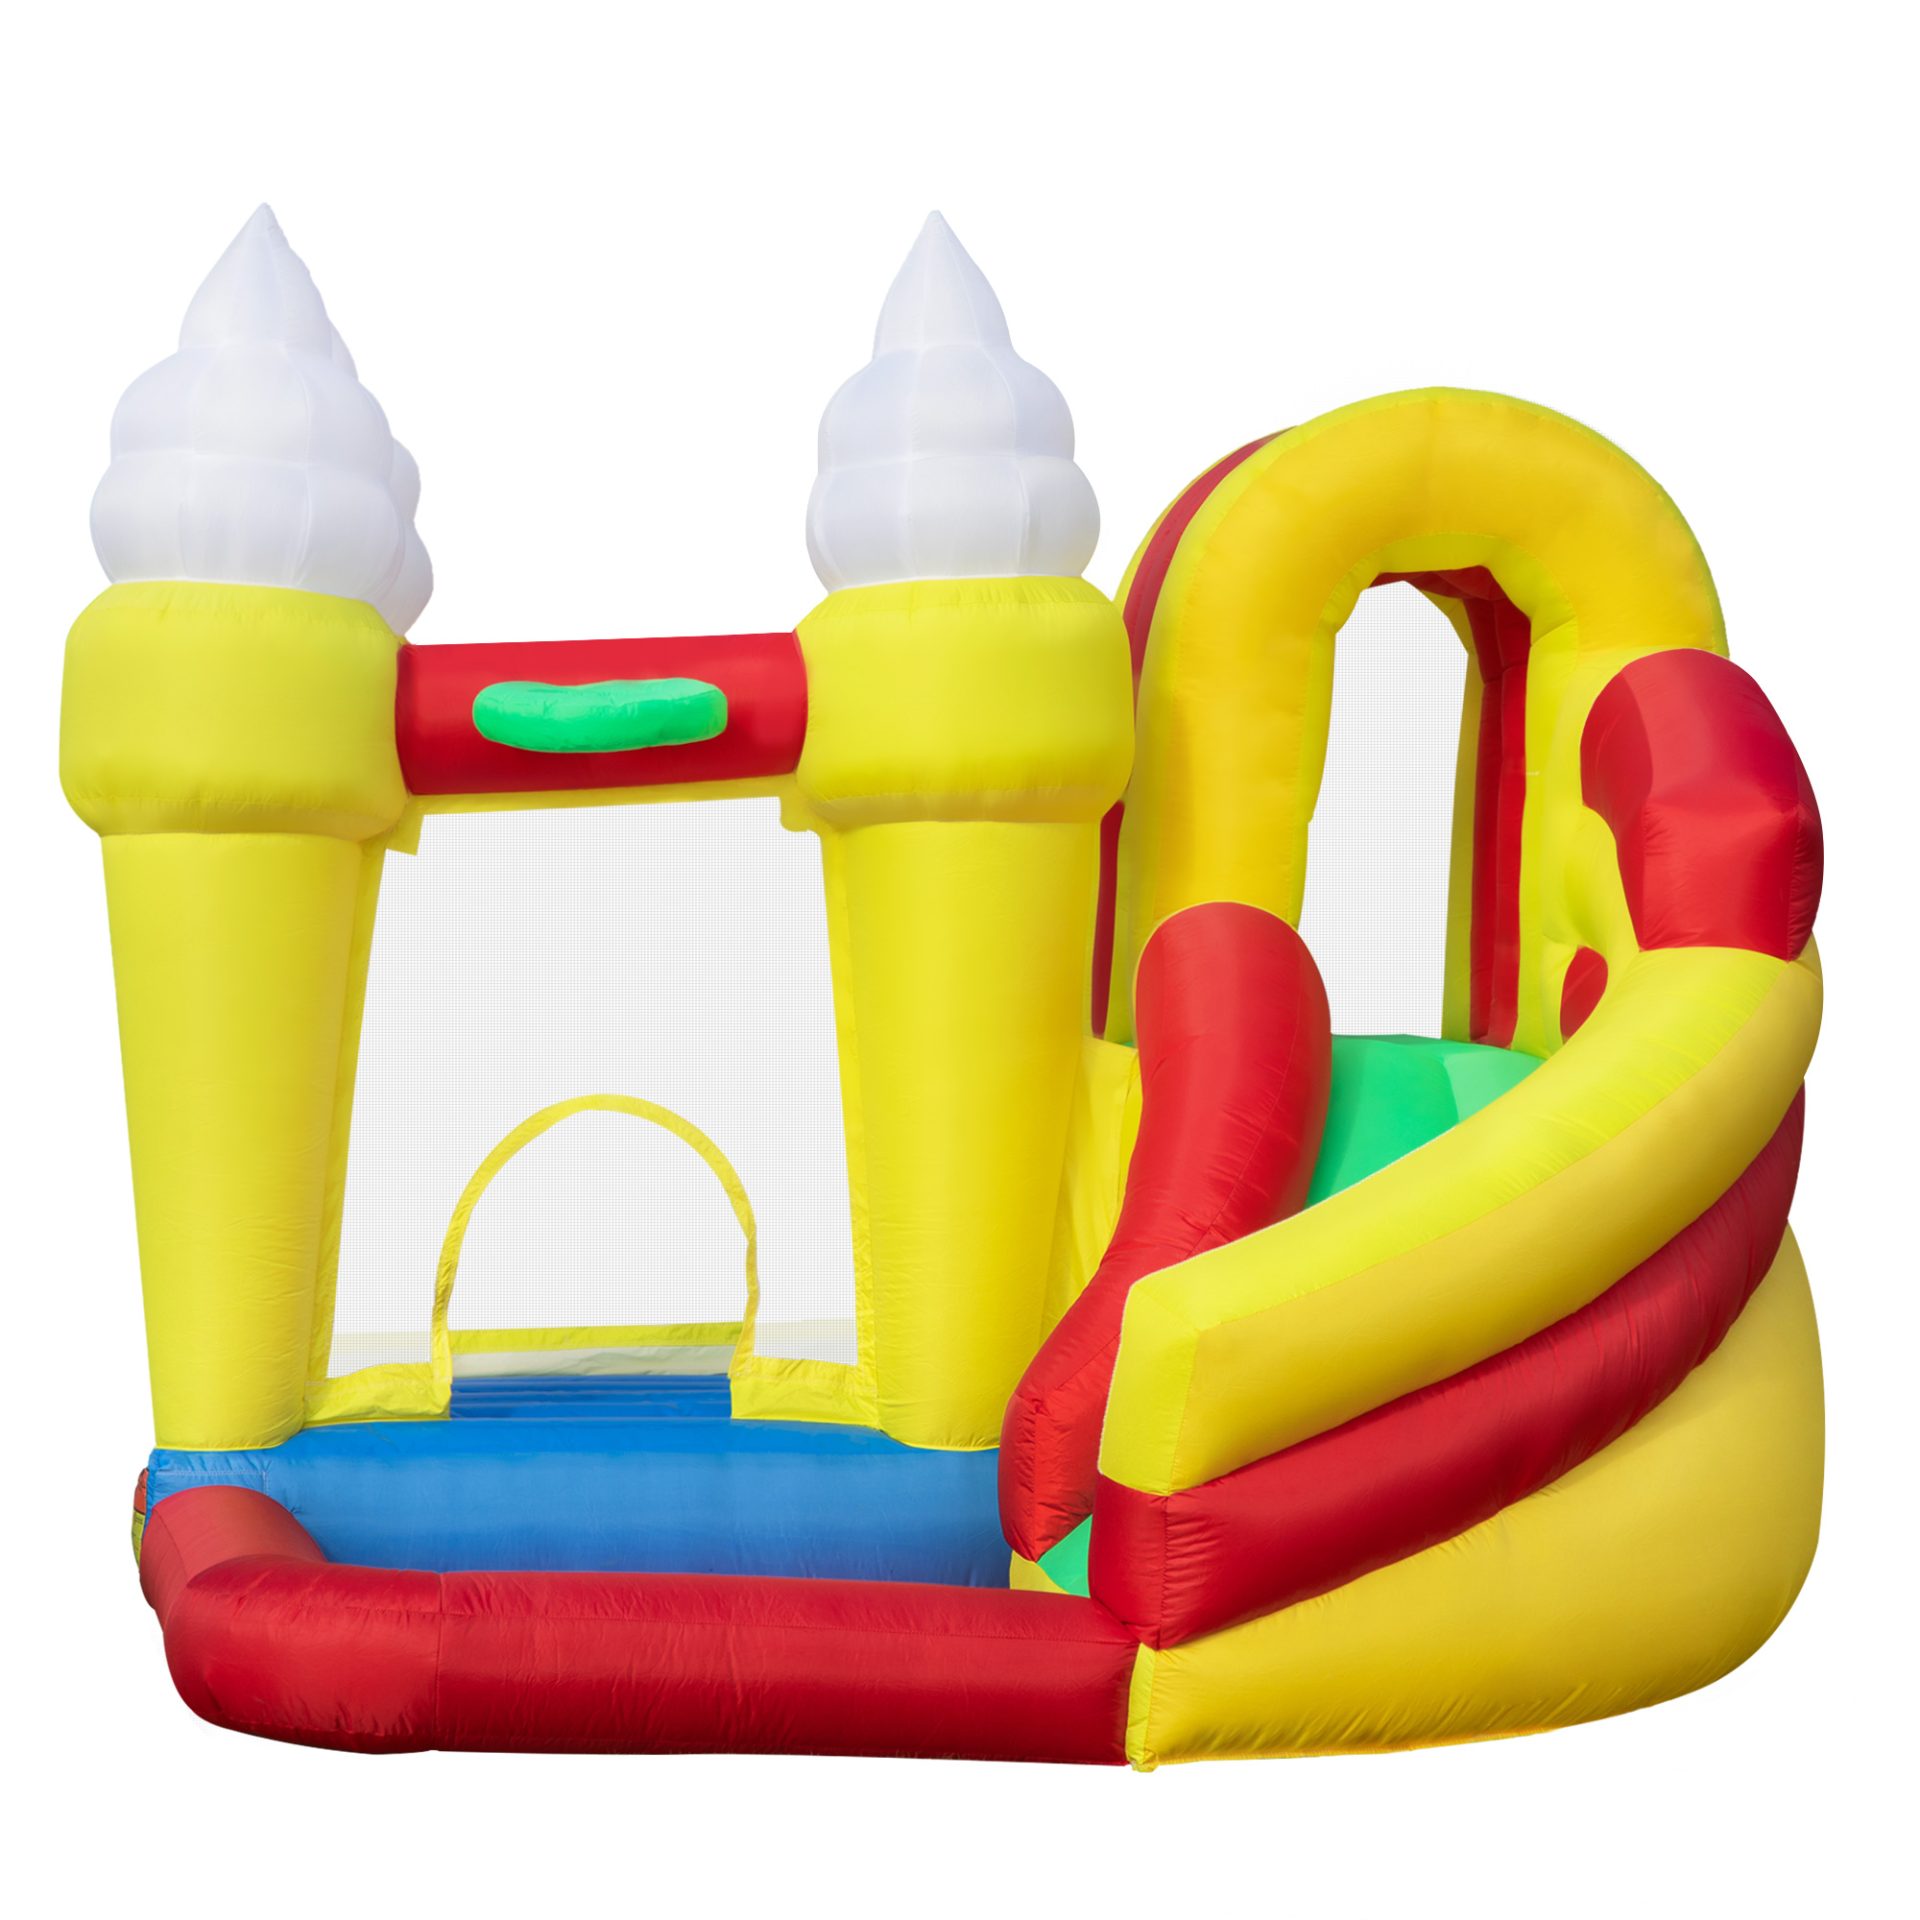 Nyeekoy Inflatable Bounce House Ice-cream Jumping Castle with Slide, Indoor Outdoor Activity Center for Children TH17G0899 3